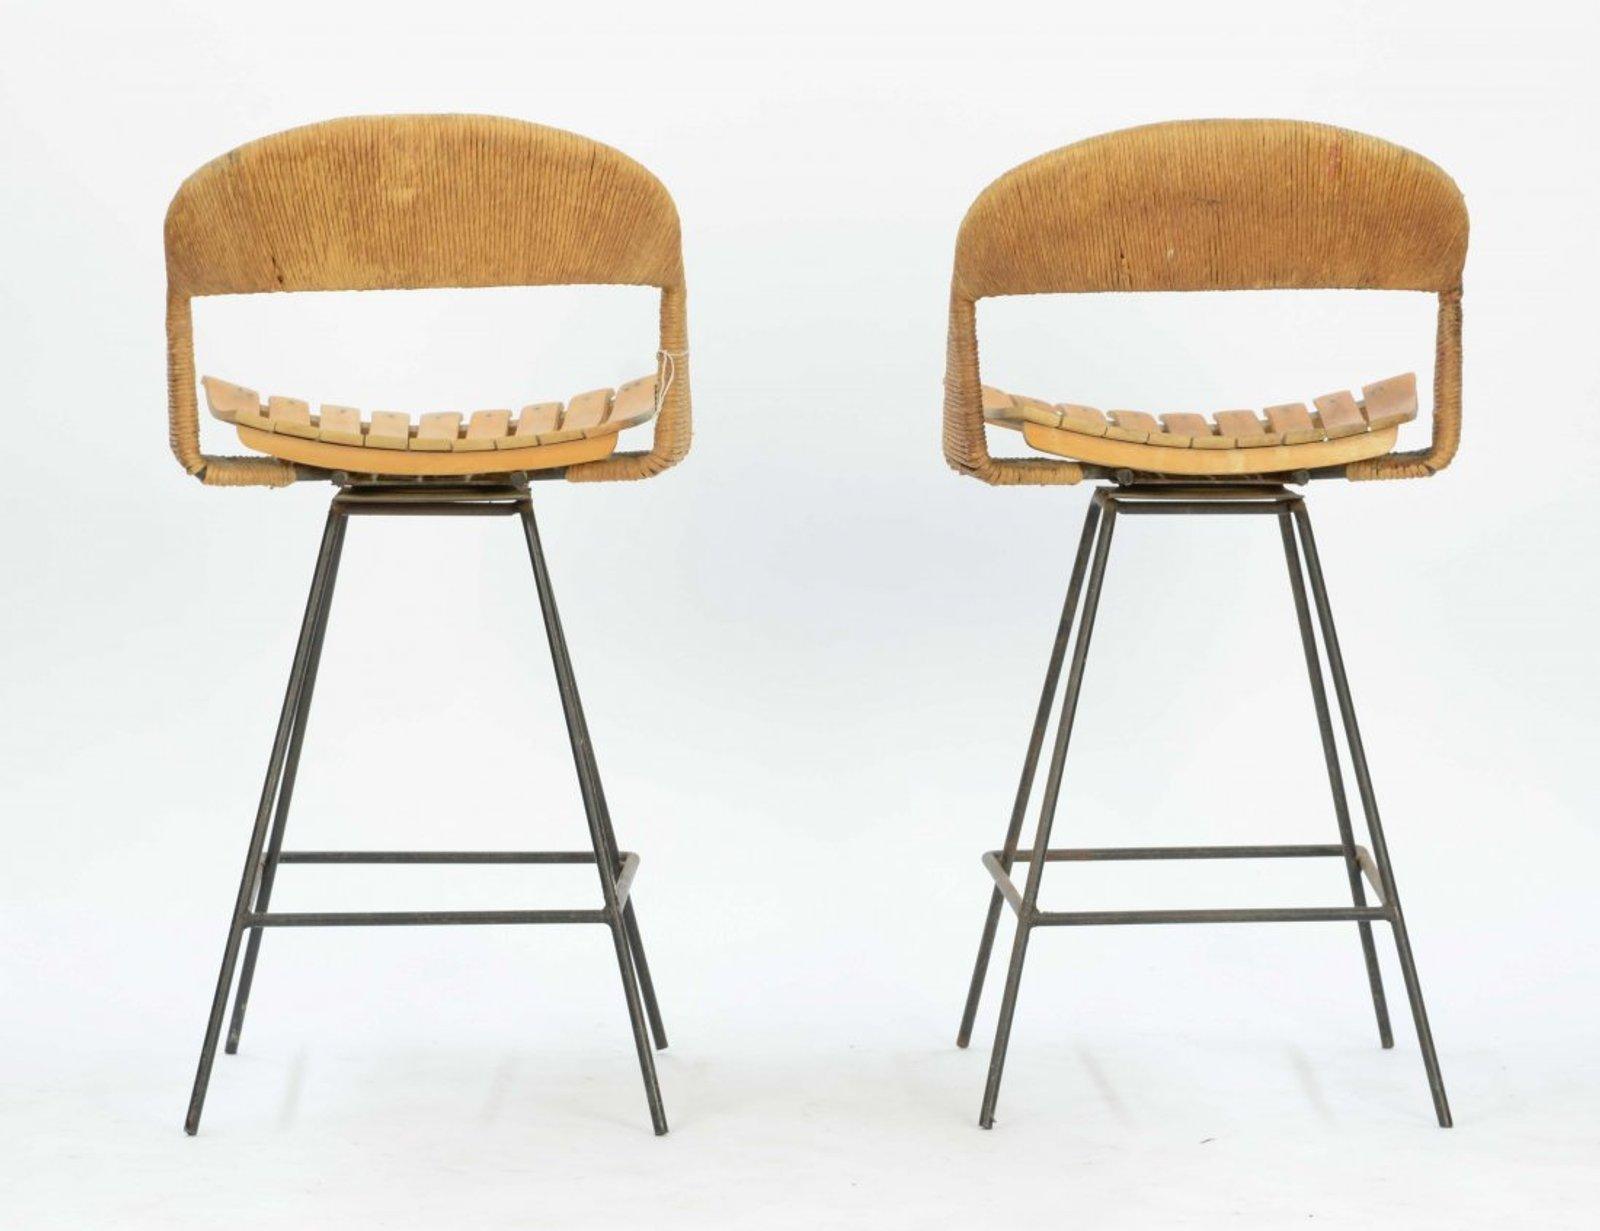 A pair of iron, wood and jute bar stools by Arthur Umanoff.